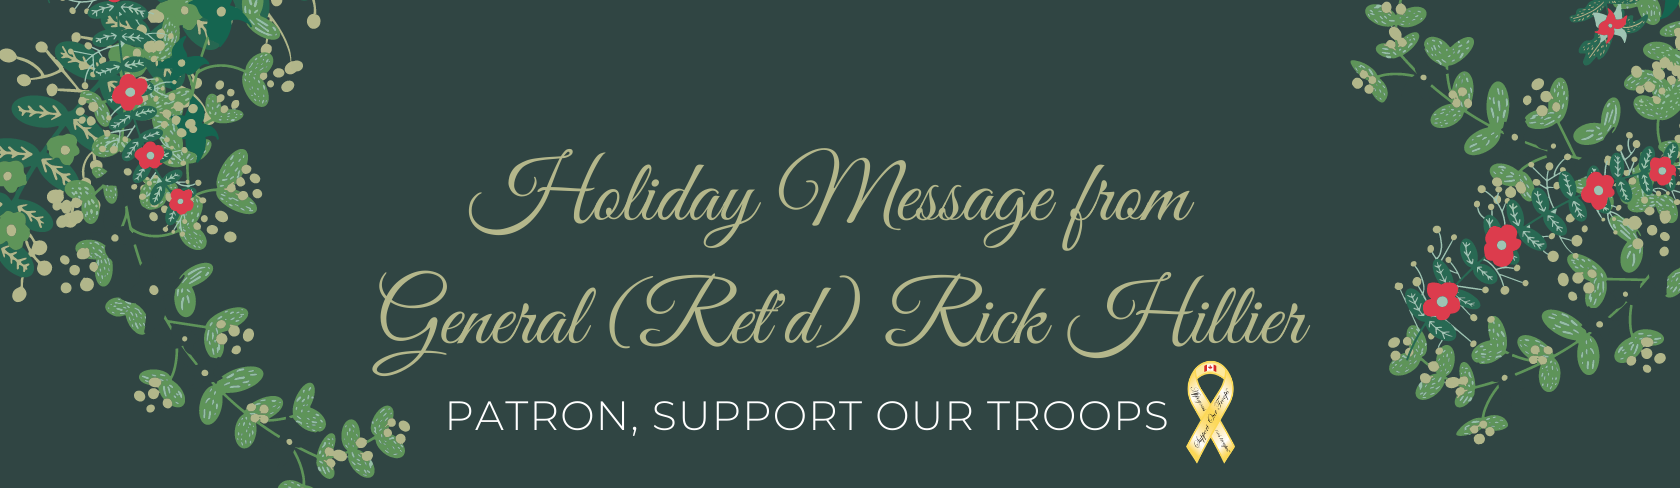 Holiday Message from General (Ret'd) Rick Hillier Image